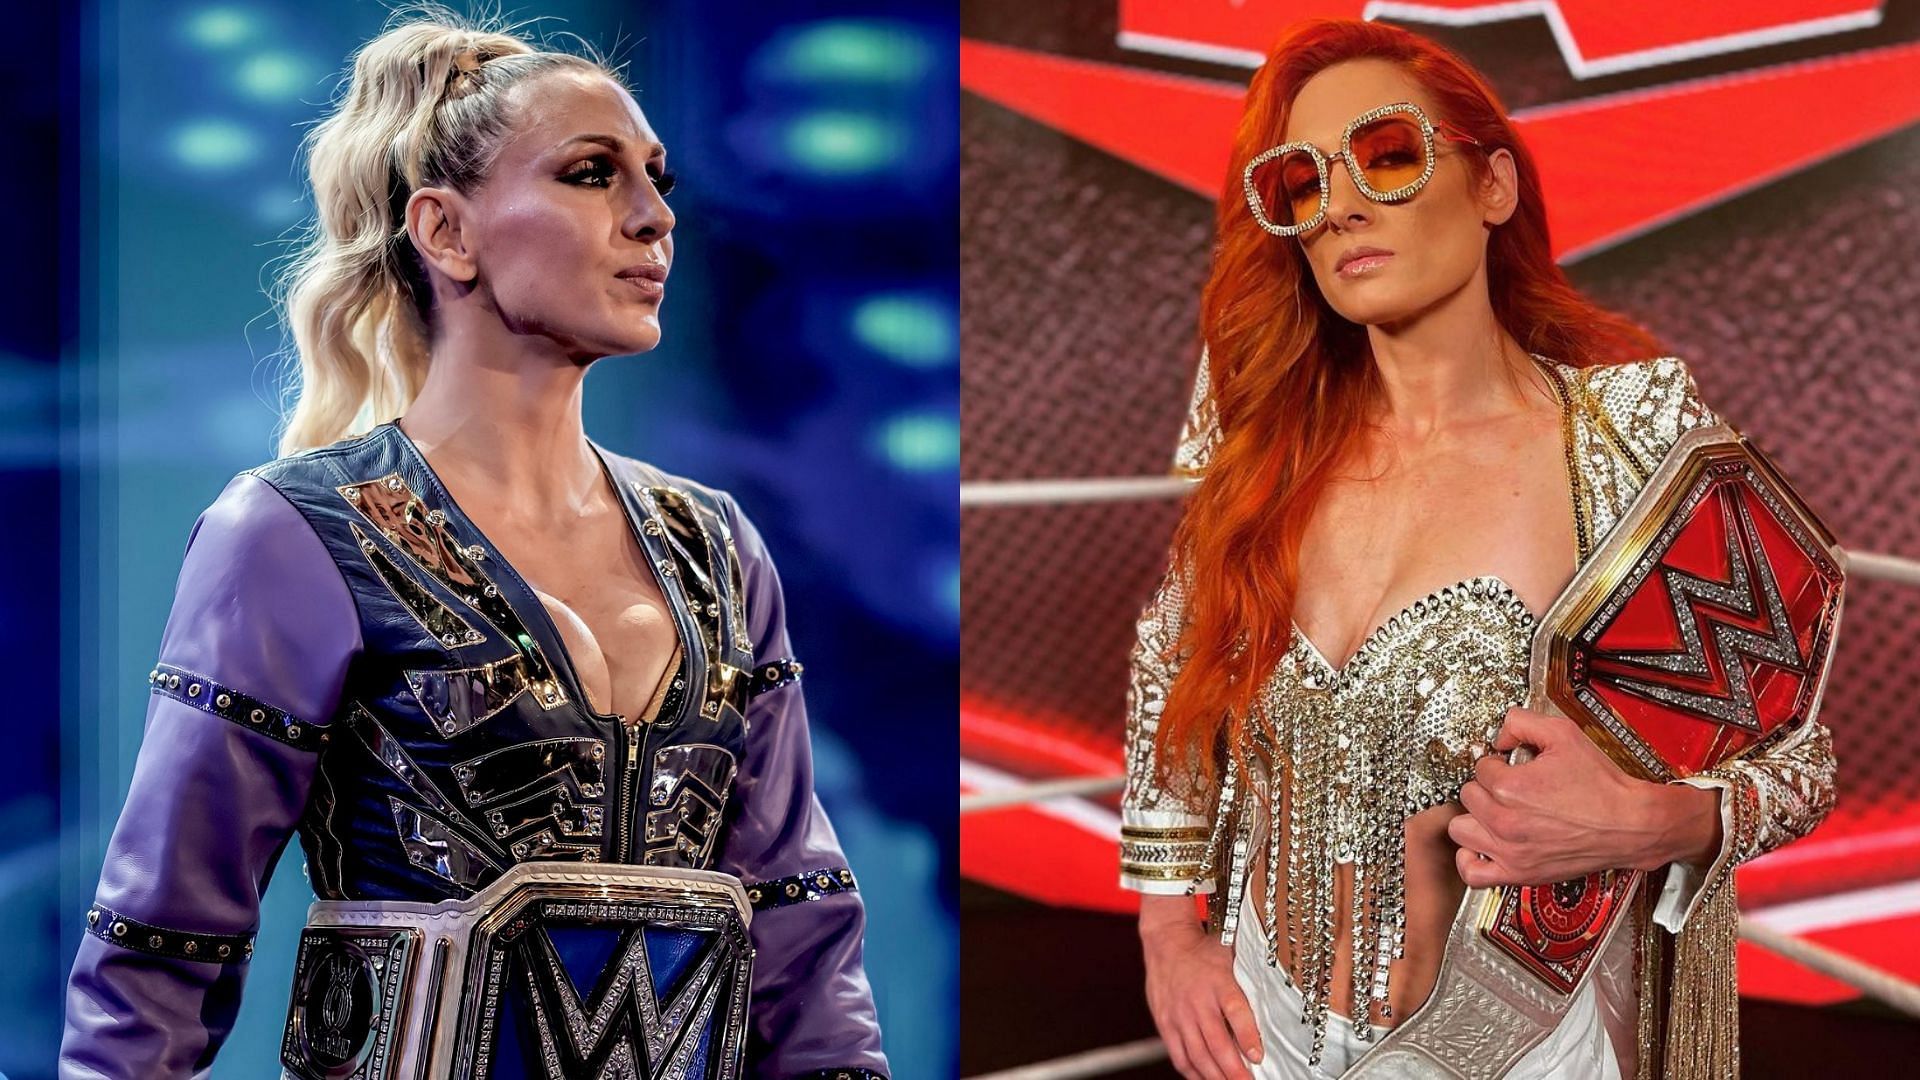 Will WWE be able to get the most out of a Charlotte Flair vs. Becky Lynch storyline?